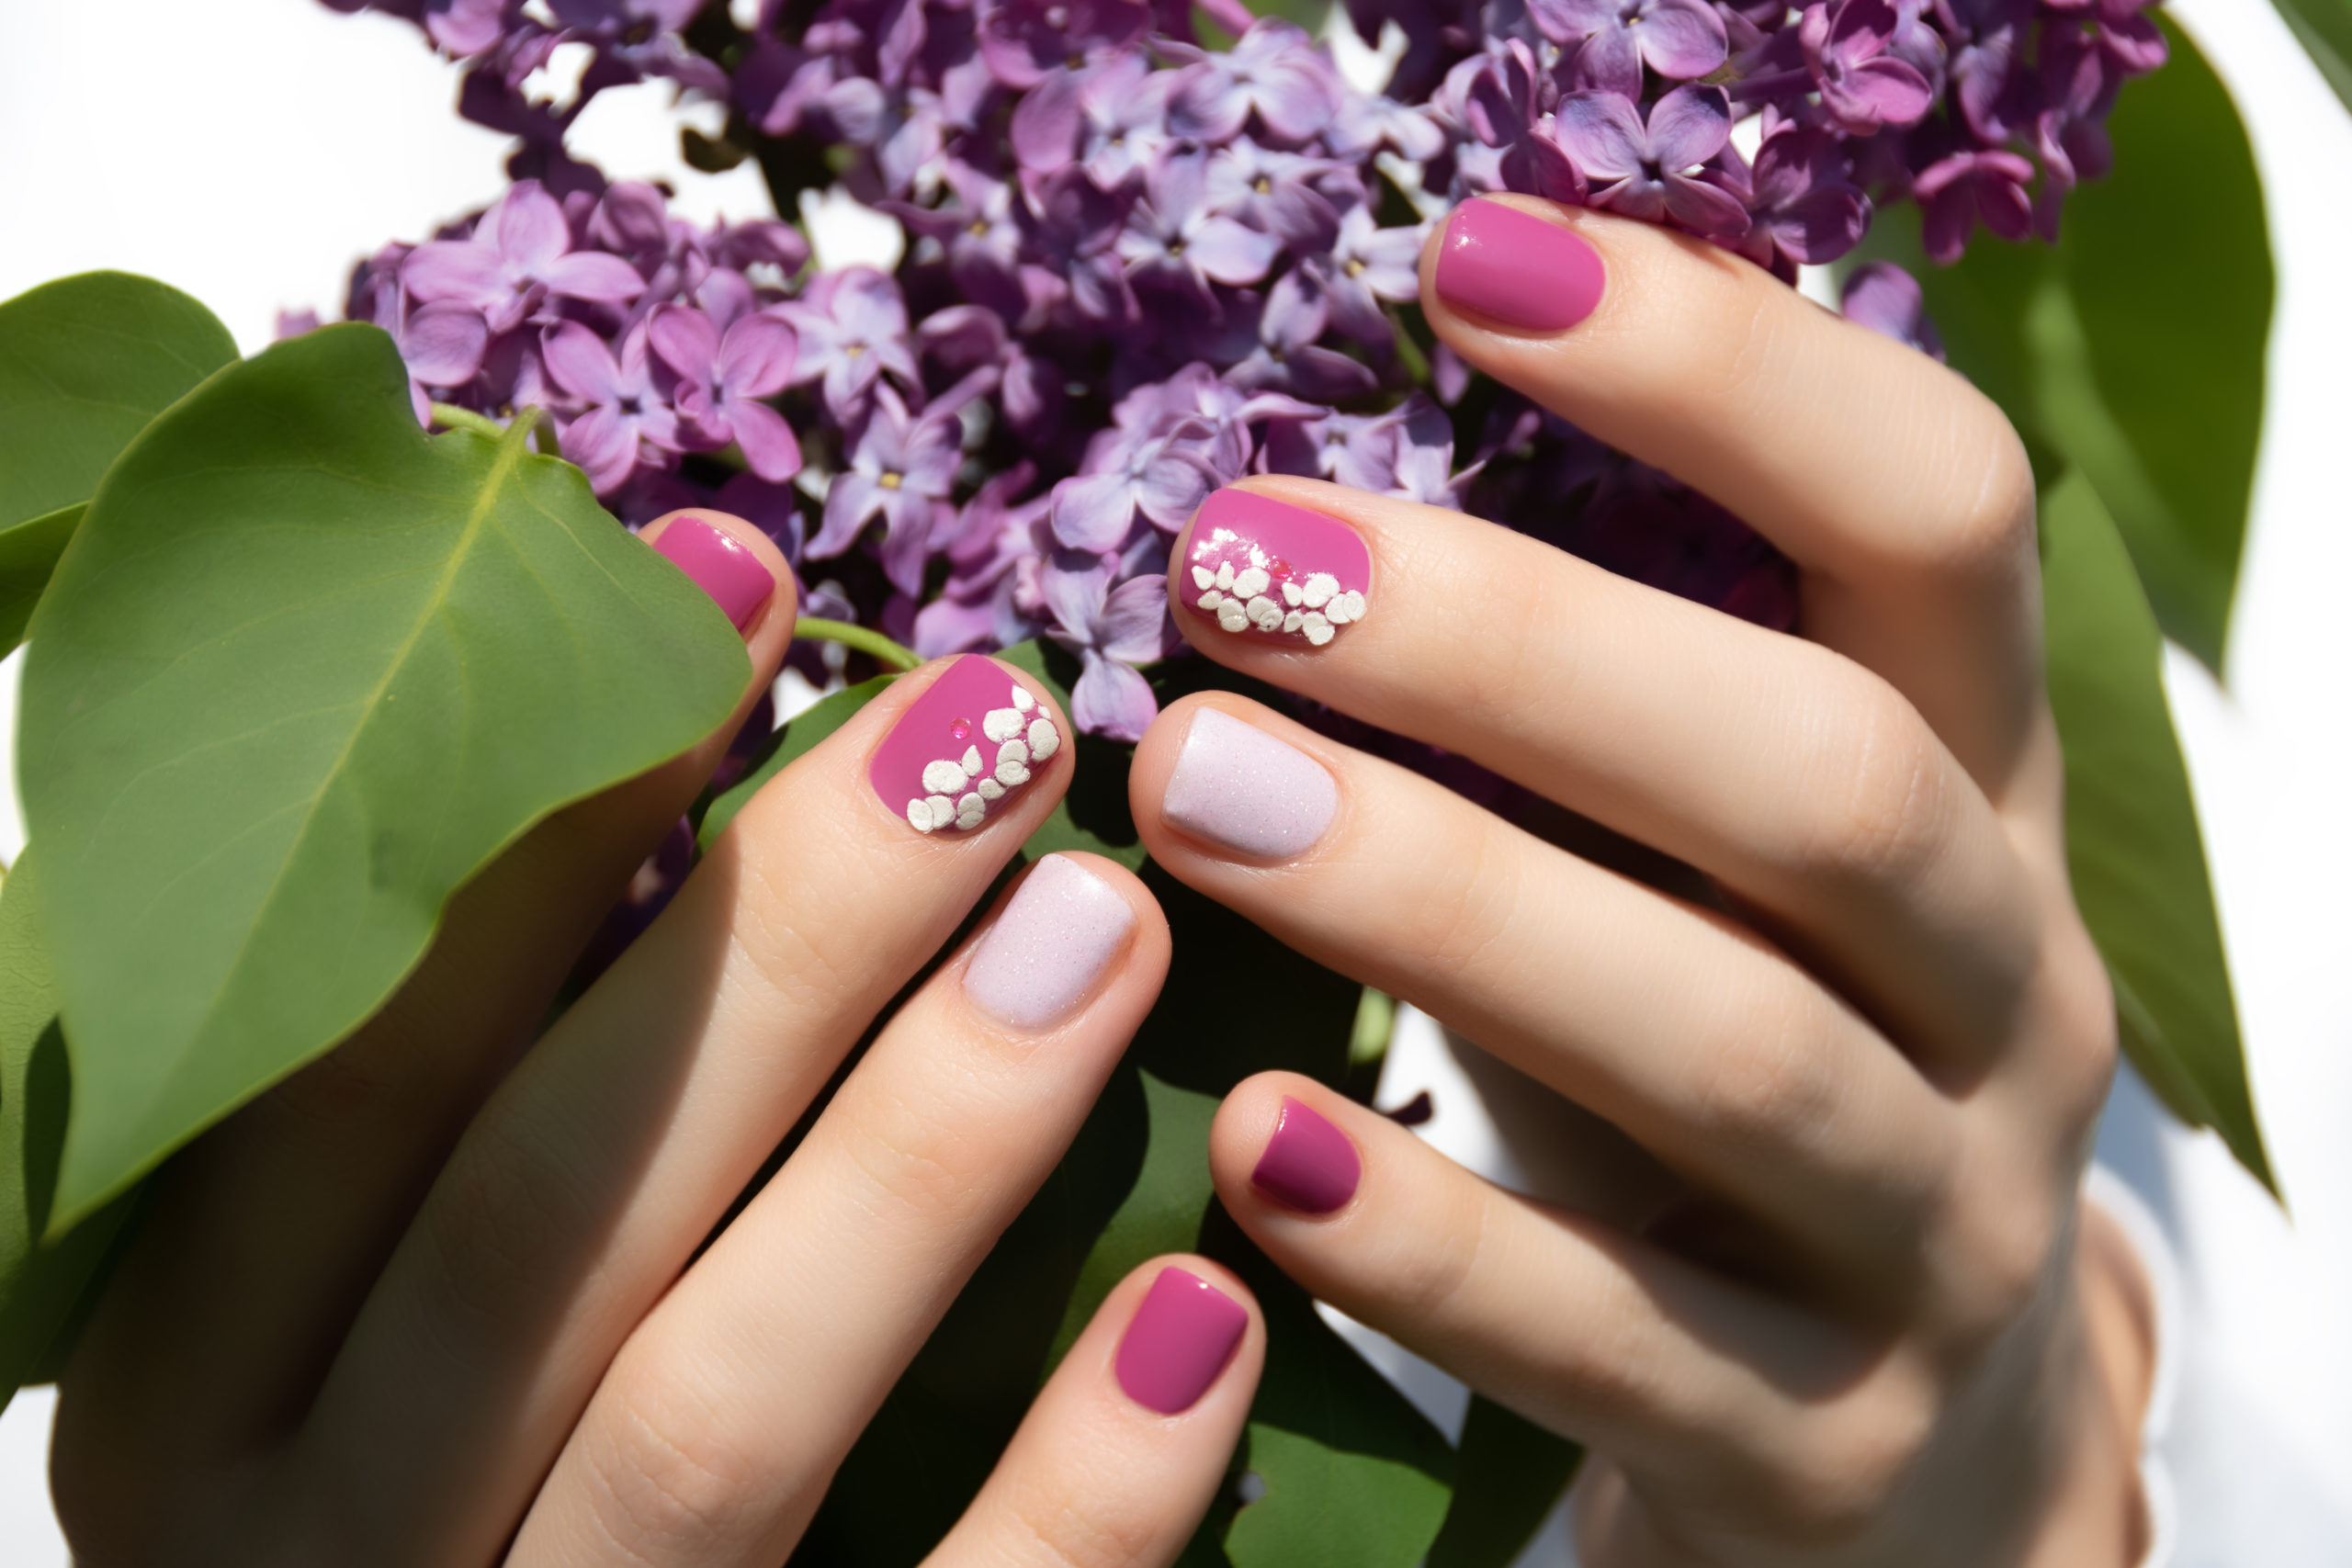 Visit Tammy Taylor Nails for Different Types of Nail Art Designs in South  Africa - Tammy Taylor Global Franchising